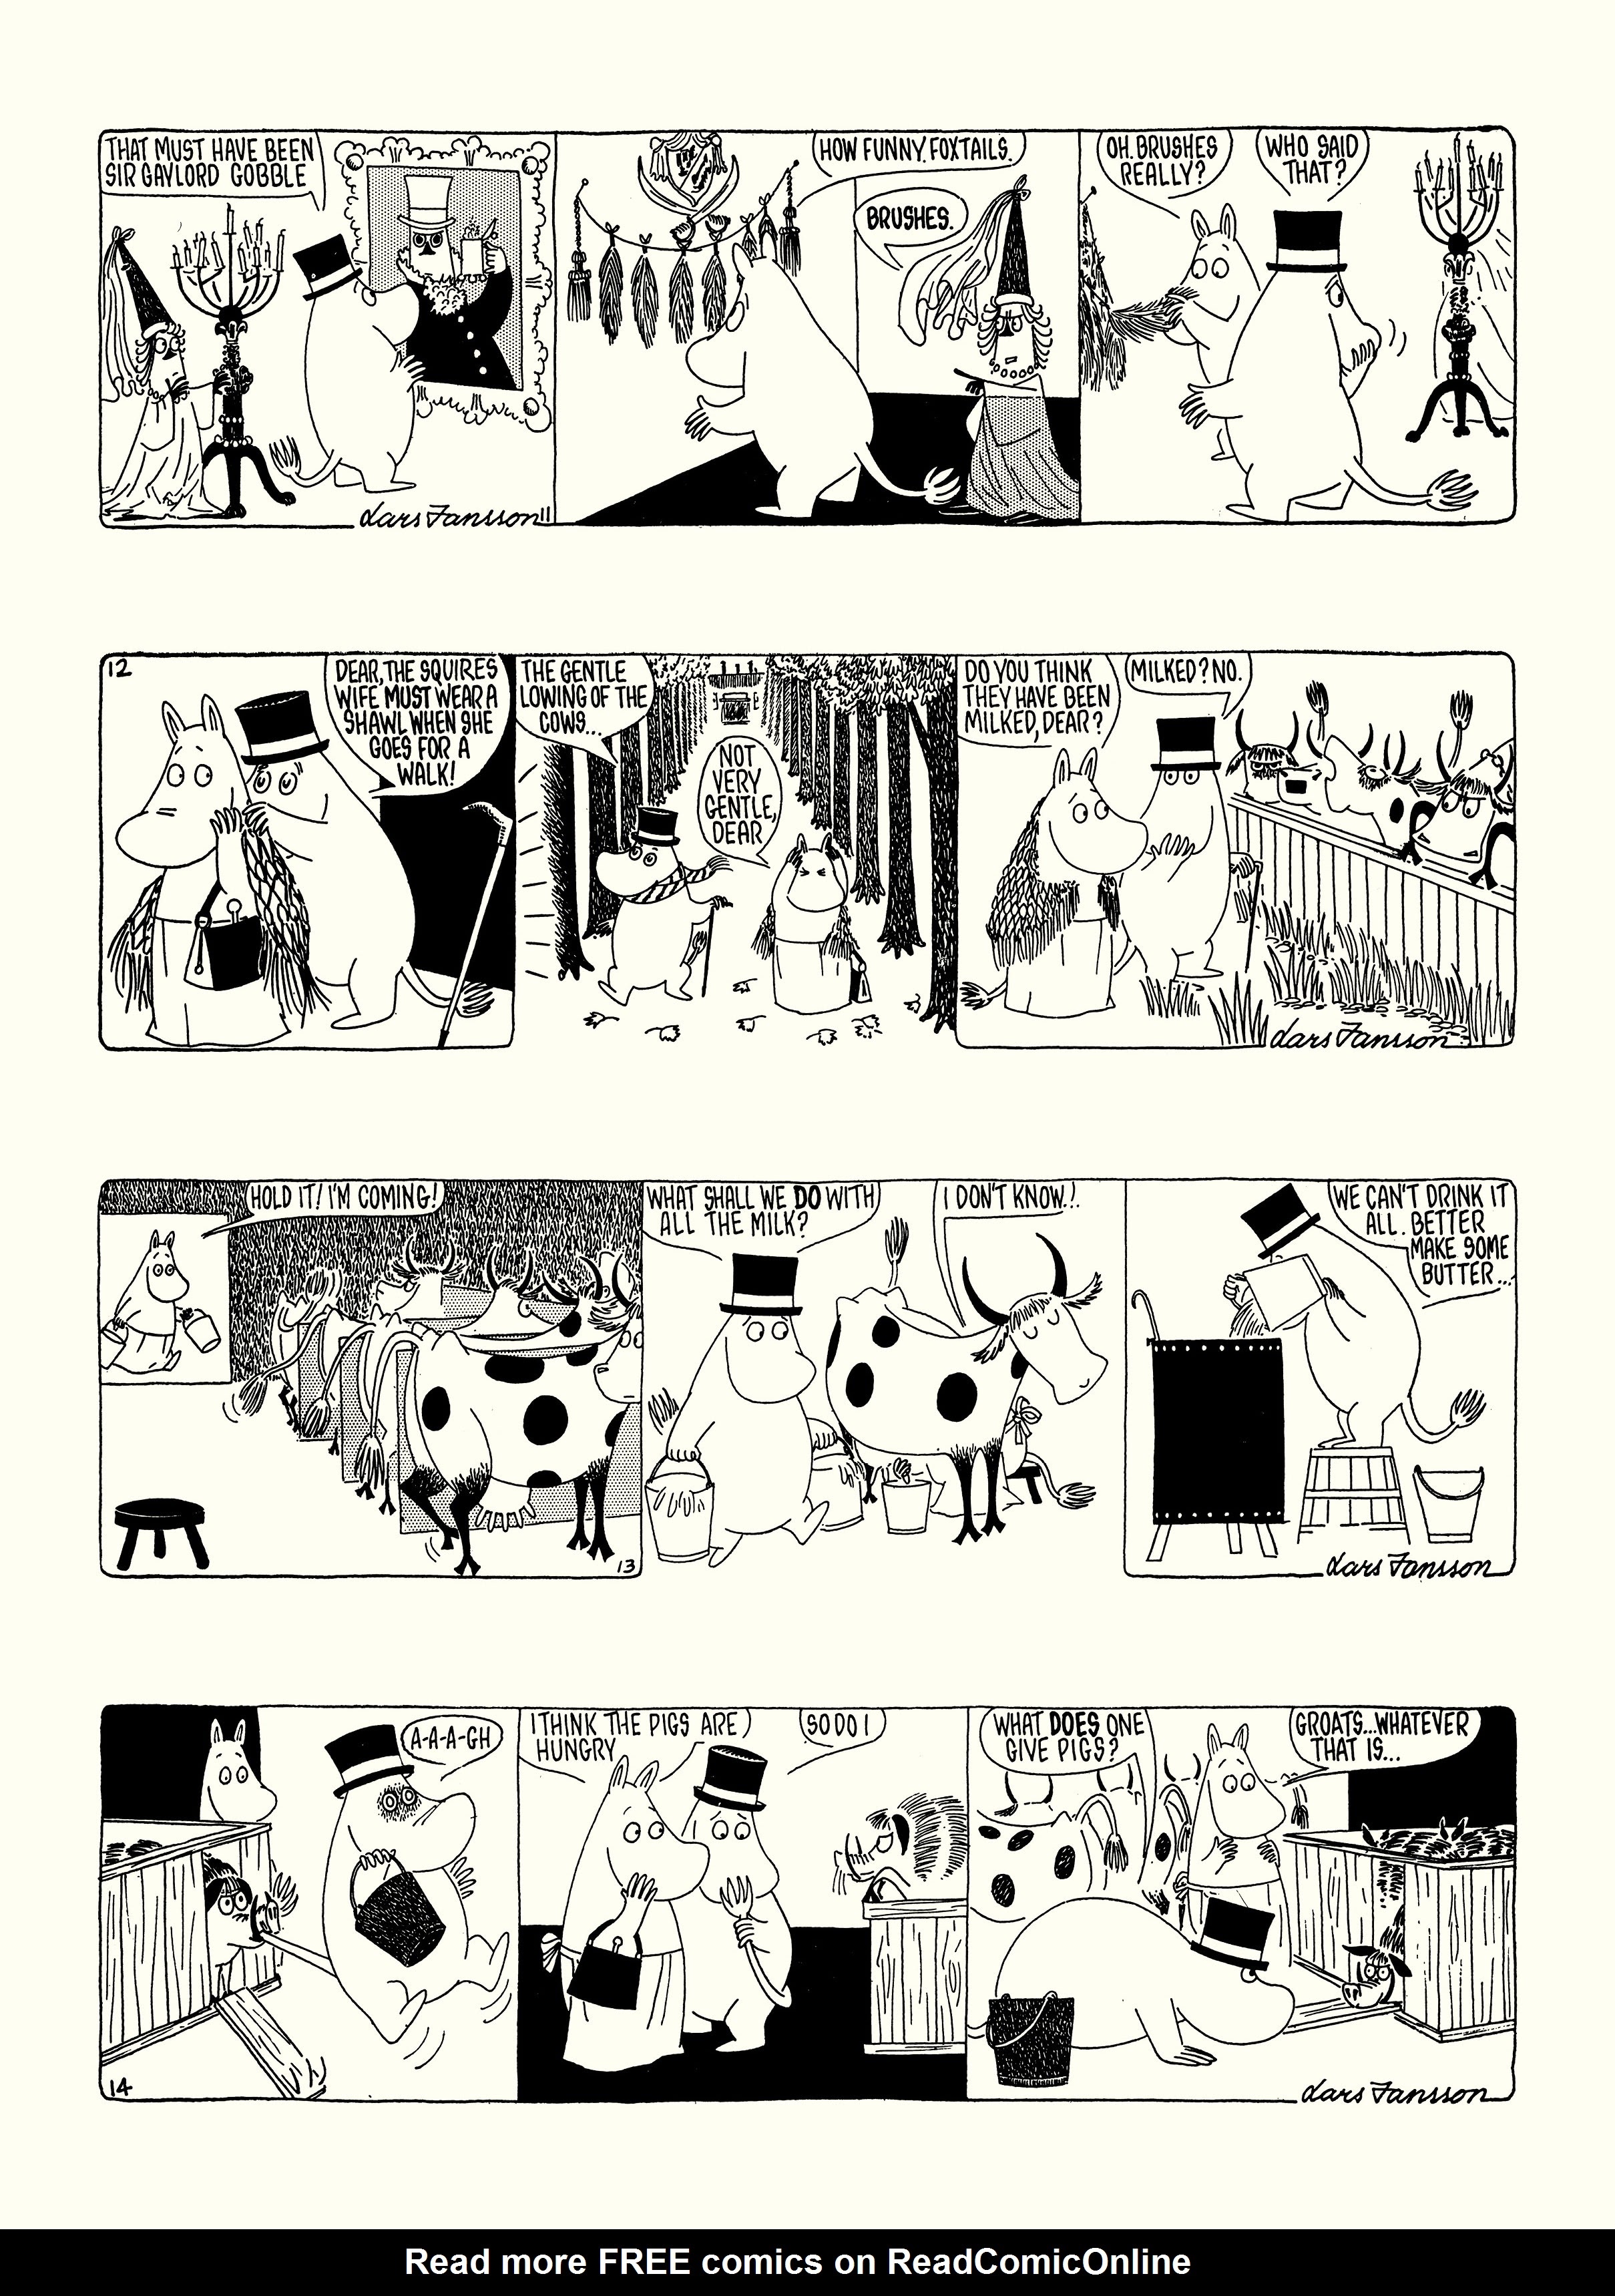 Read online Moomin: The Complete Lars Jansson Comic Strip comic -  Issue # TPB 7 - 51